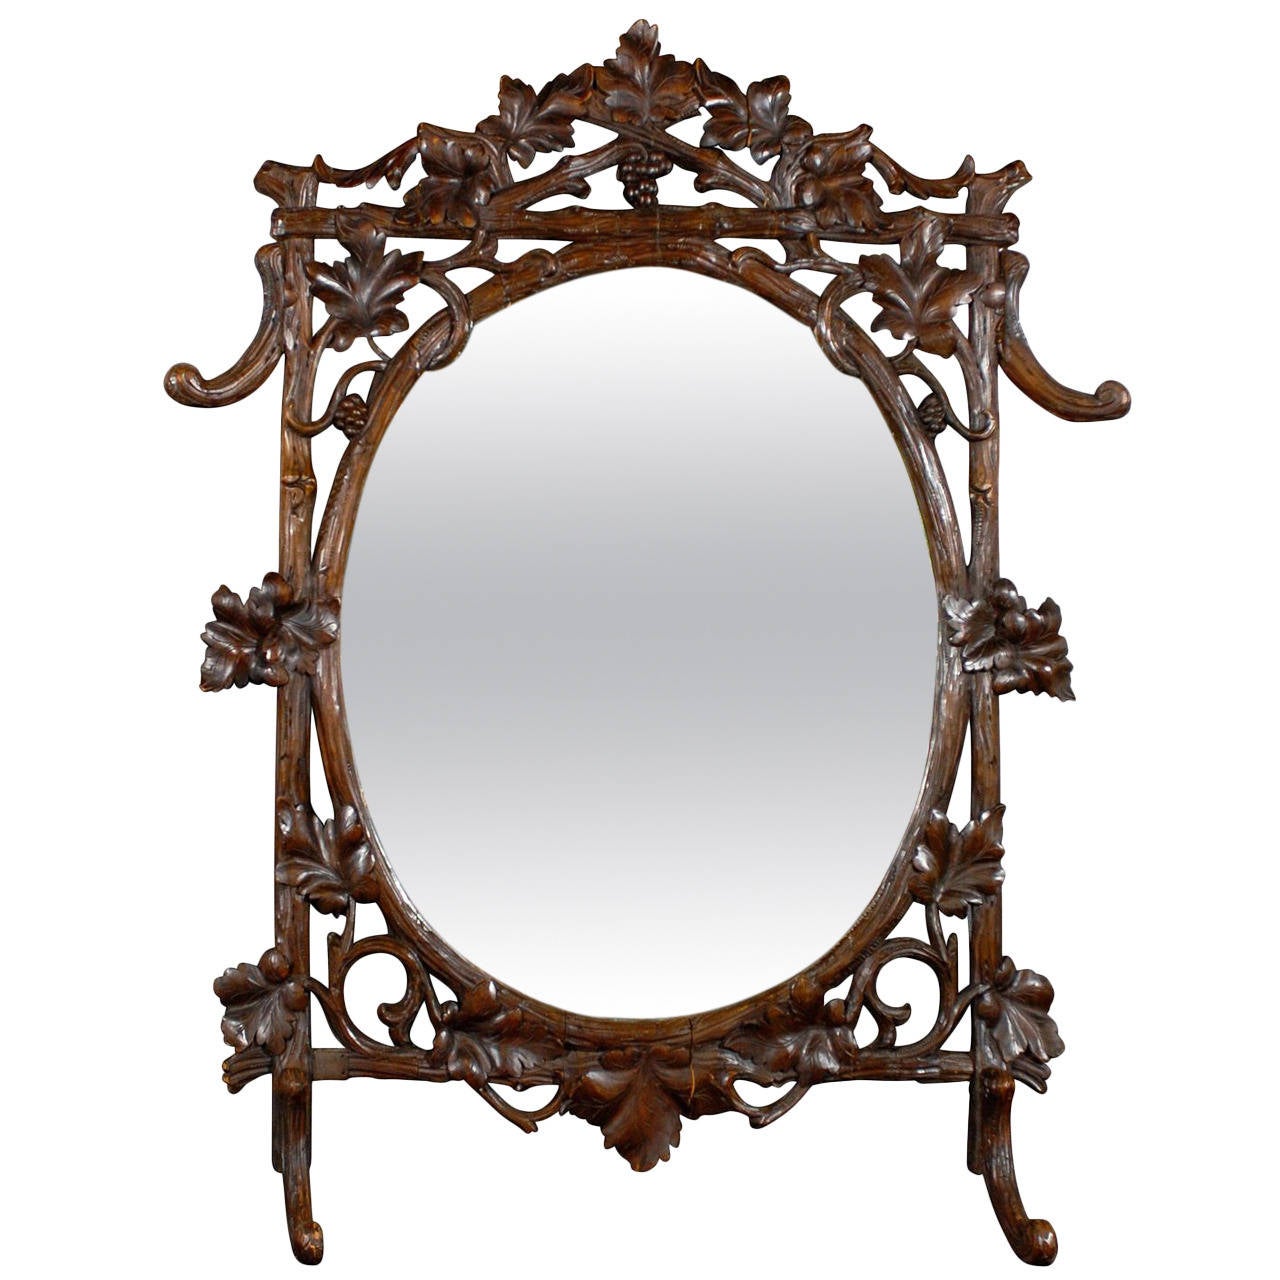 19th Century Black Forest Mirror at 1stdibs